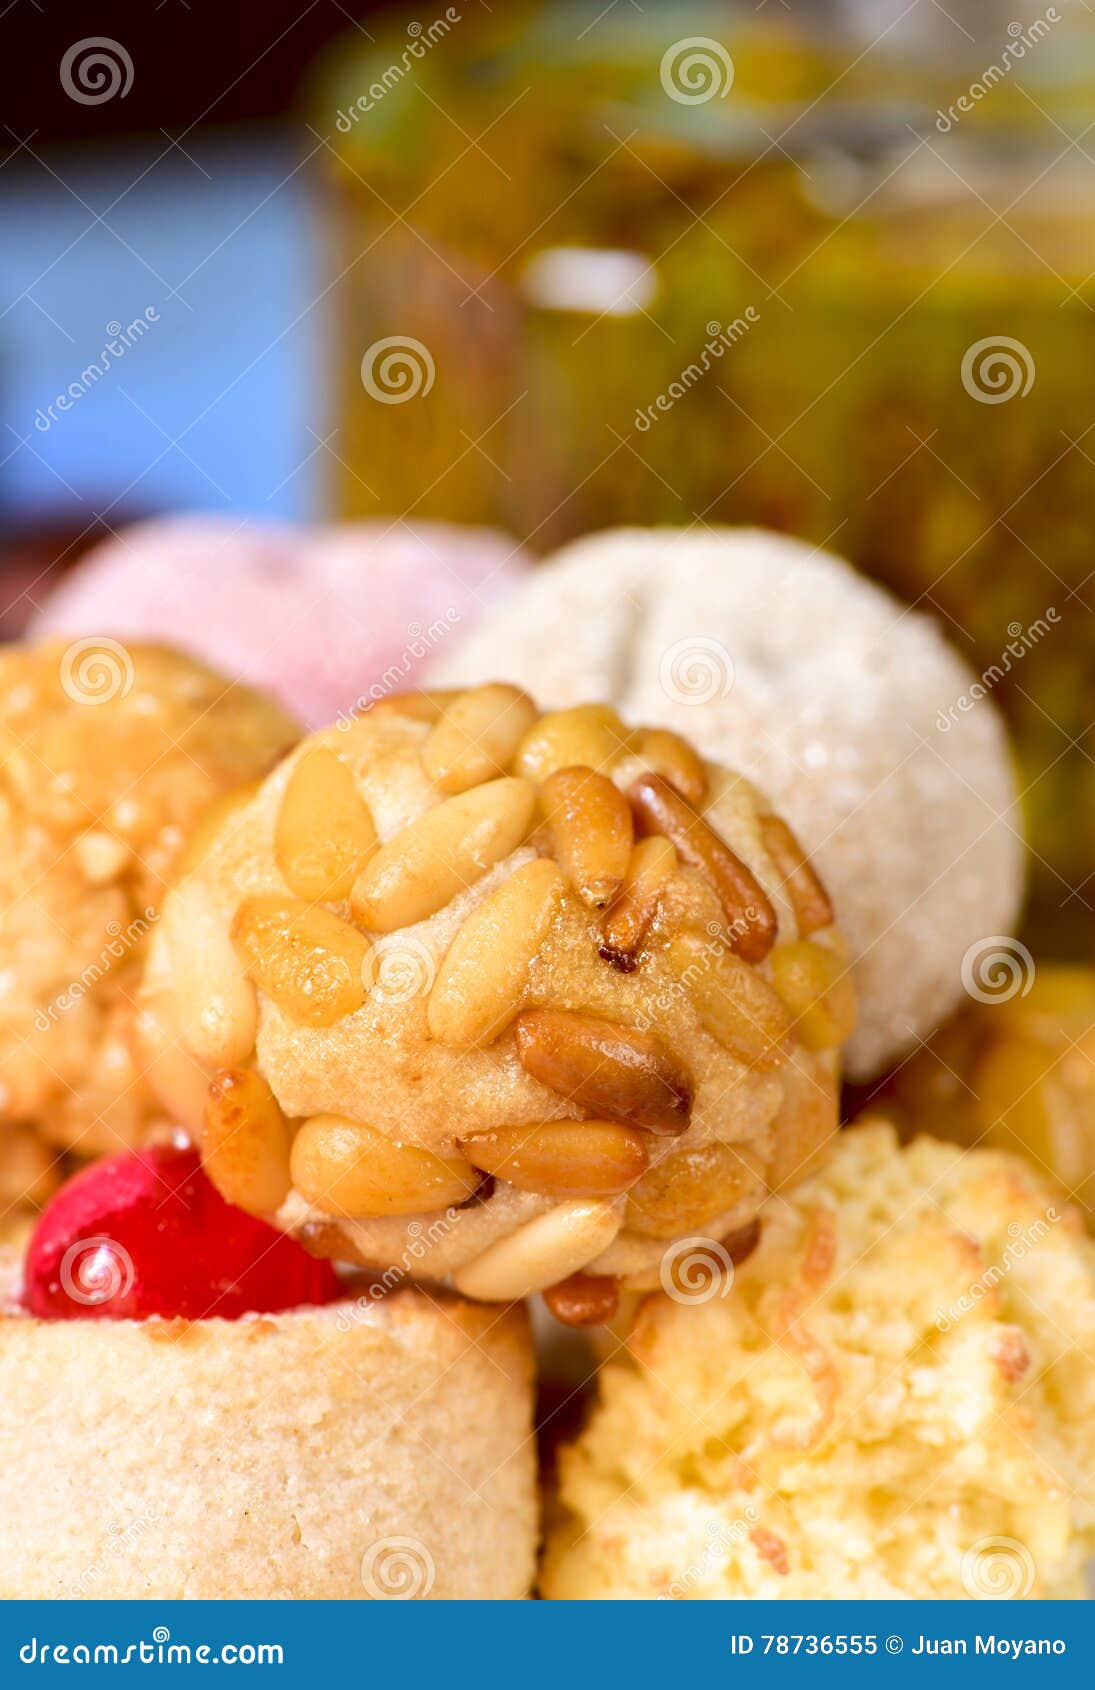 panellets, typical confection eaten in all saints day in catalonia, spain